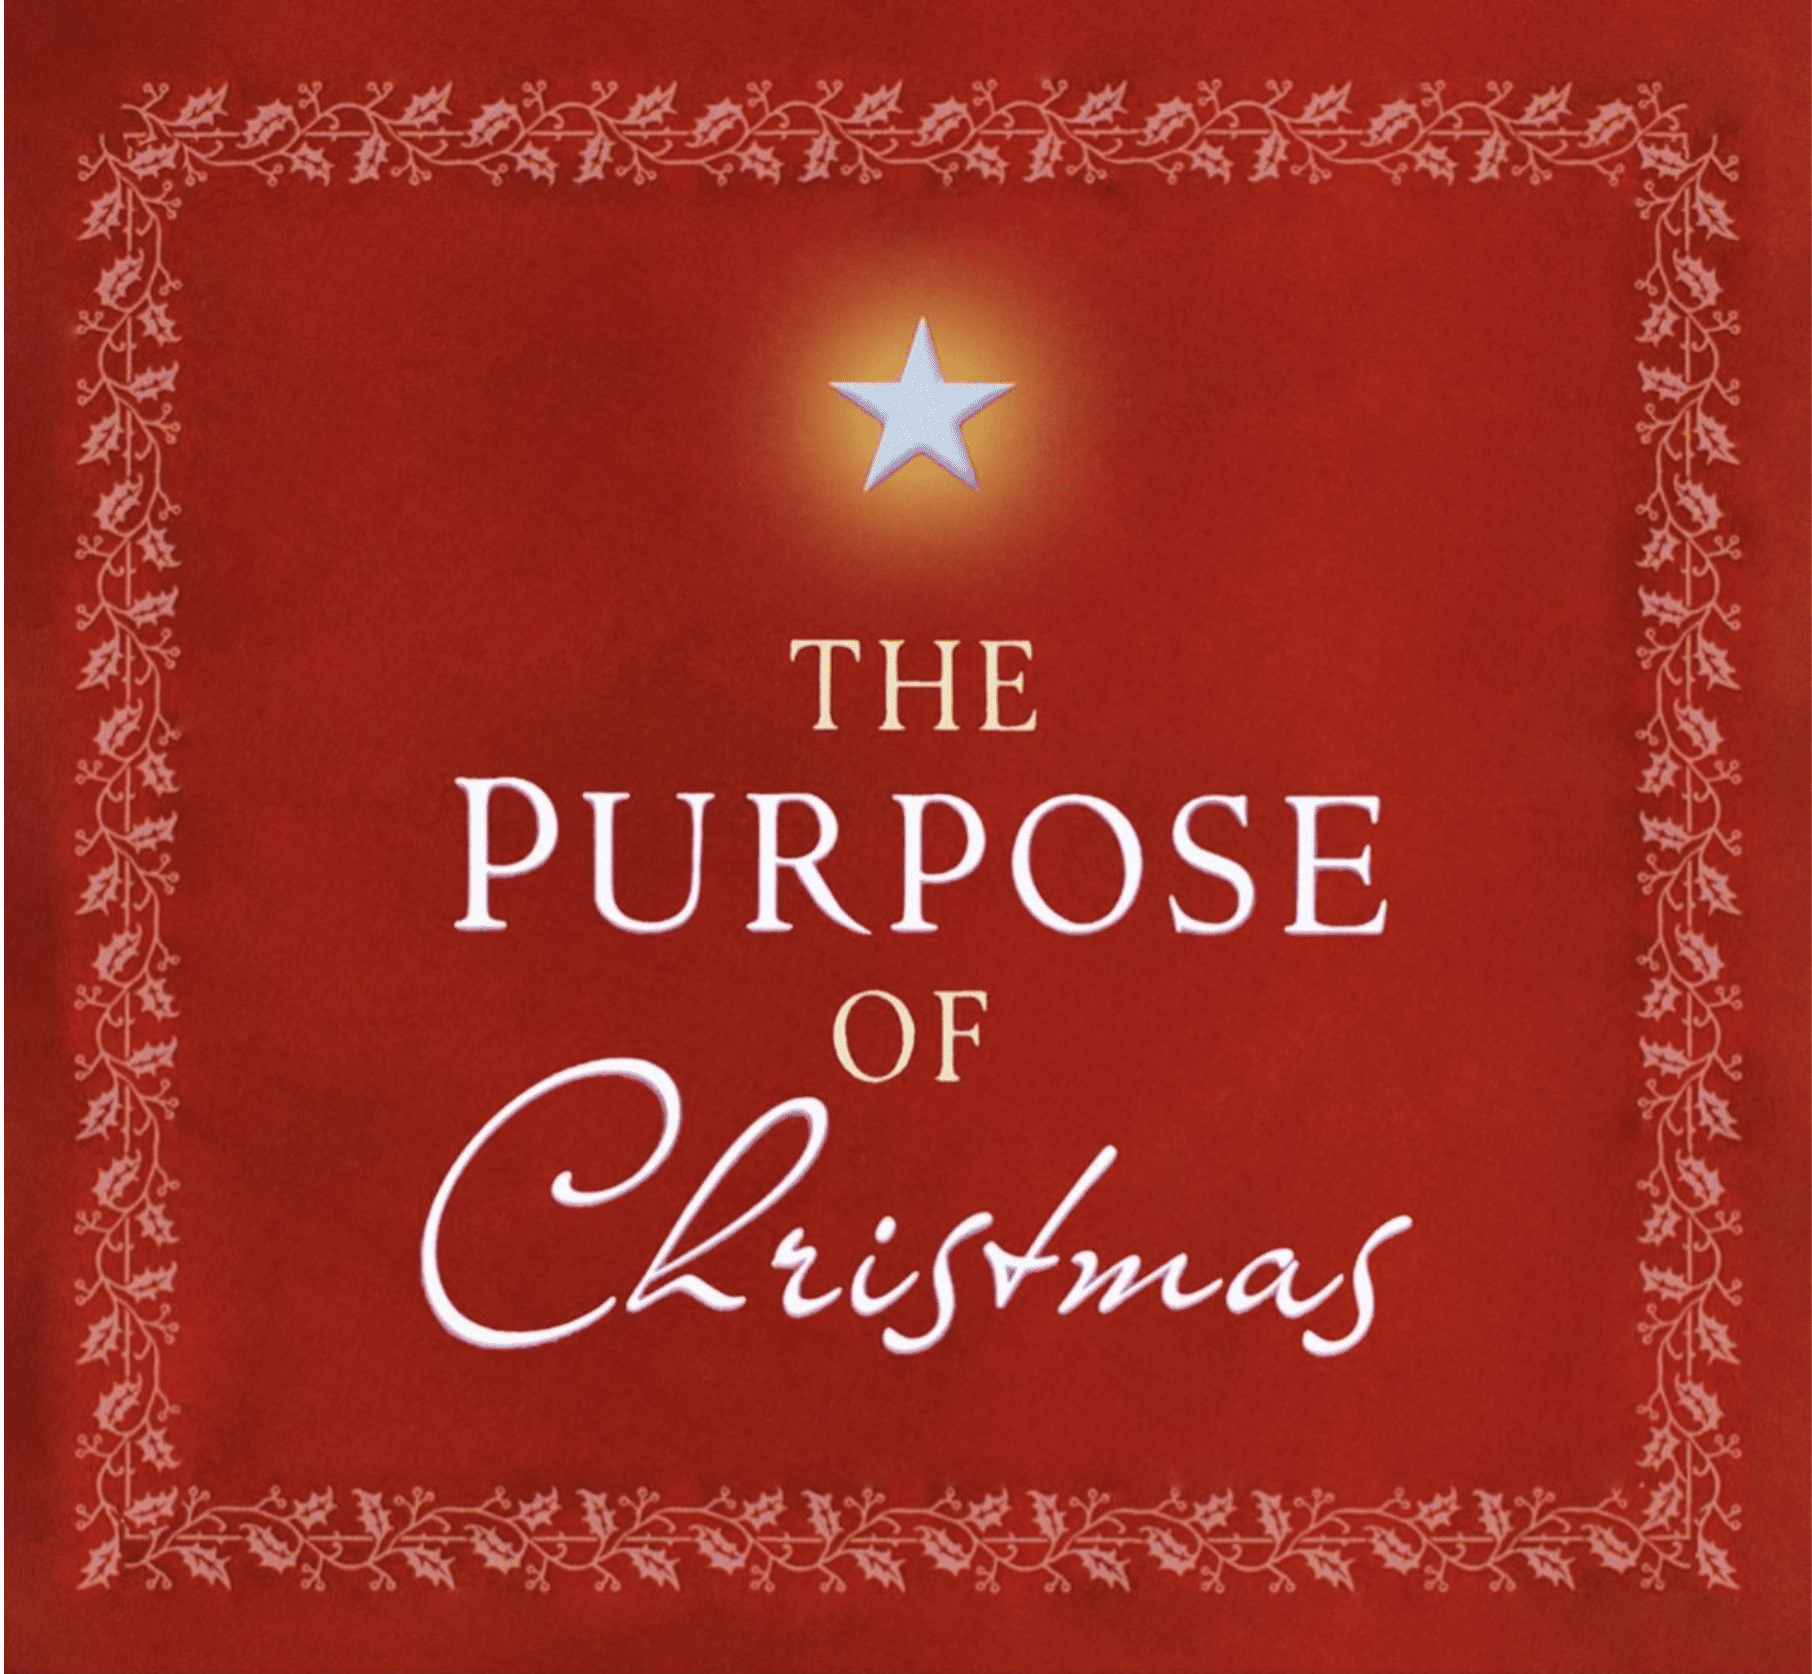 "The Purpose of Christmas" with Dr. Ike Reighard